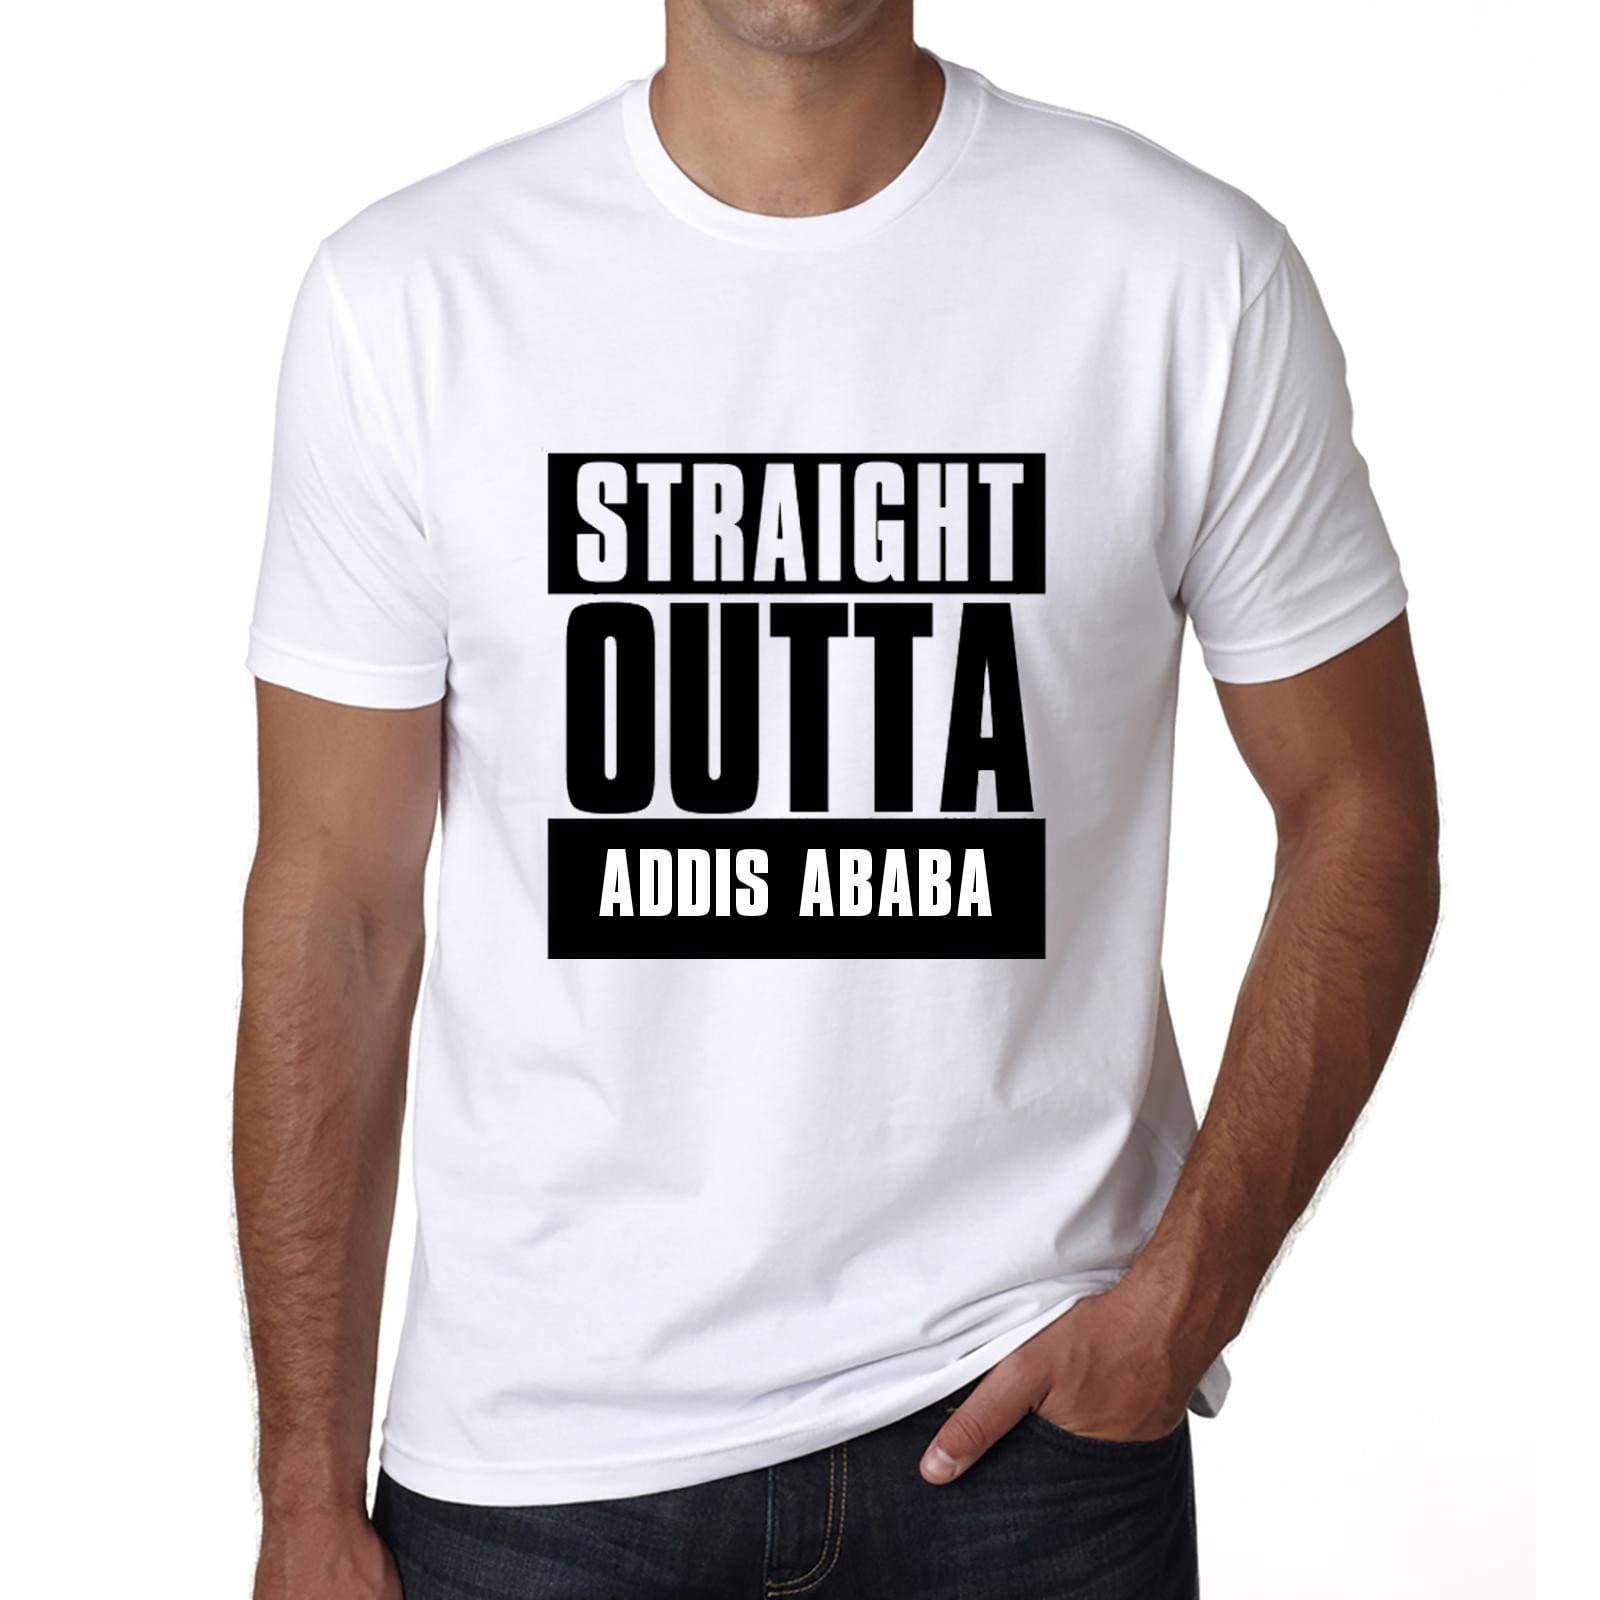 Straight Outta Addis Ababa Mens Short Sleeve Round Neck T-Shirt 00027 - White / S - Casual